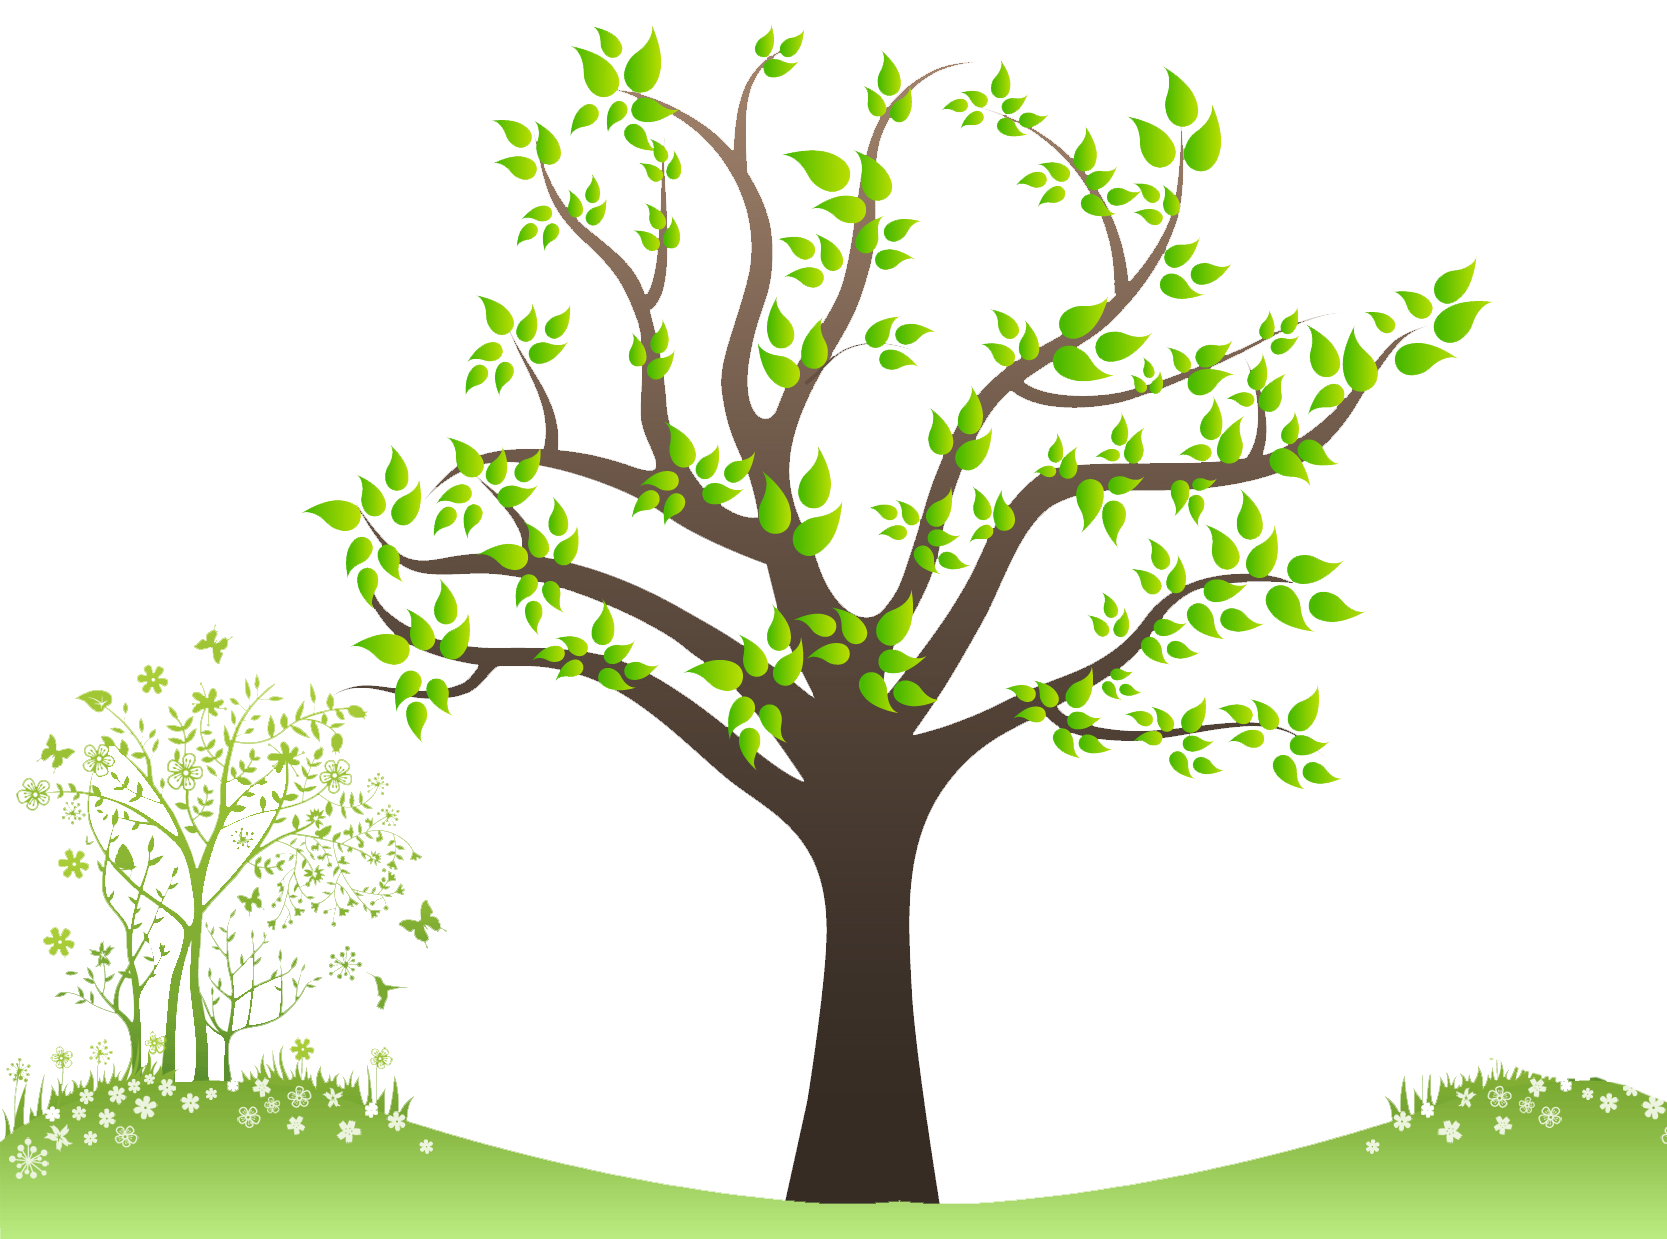 35+ Latest Background Images For Family Tree - Cool Background Collection